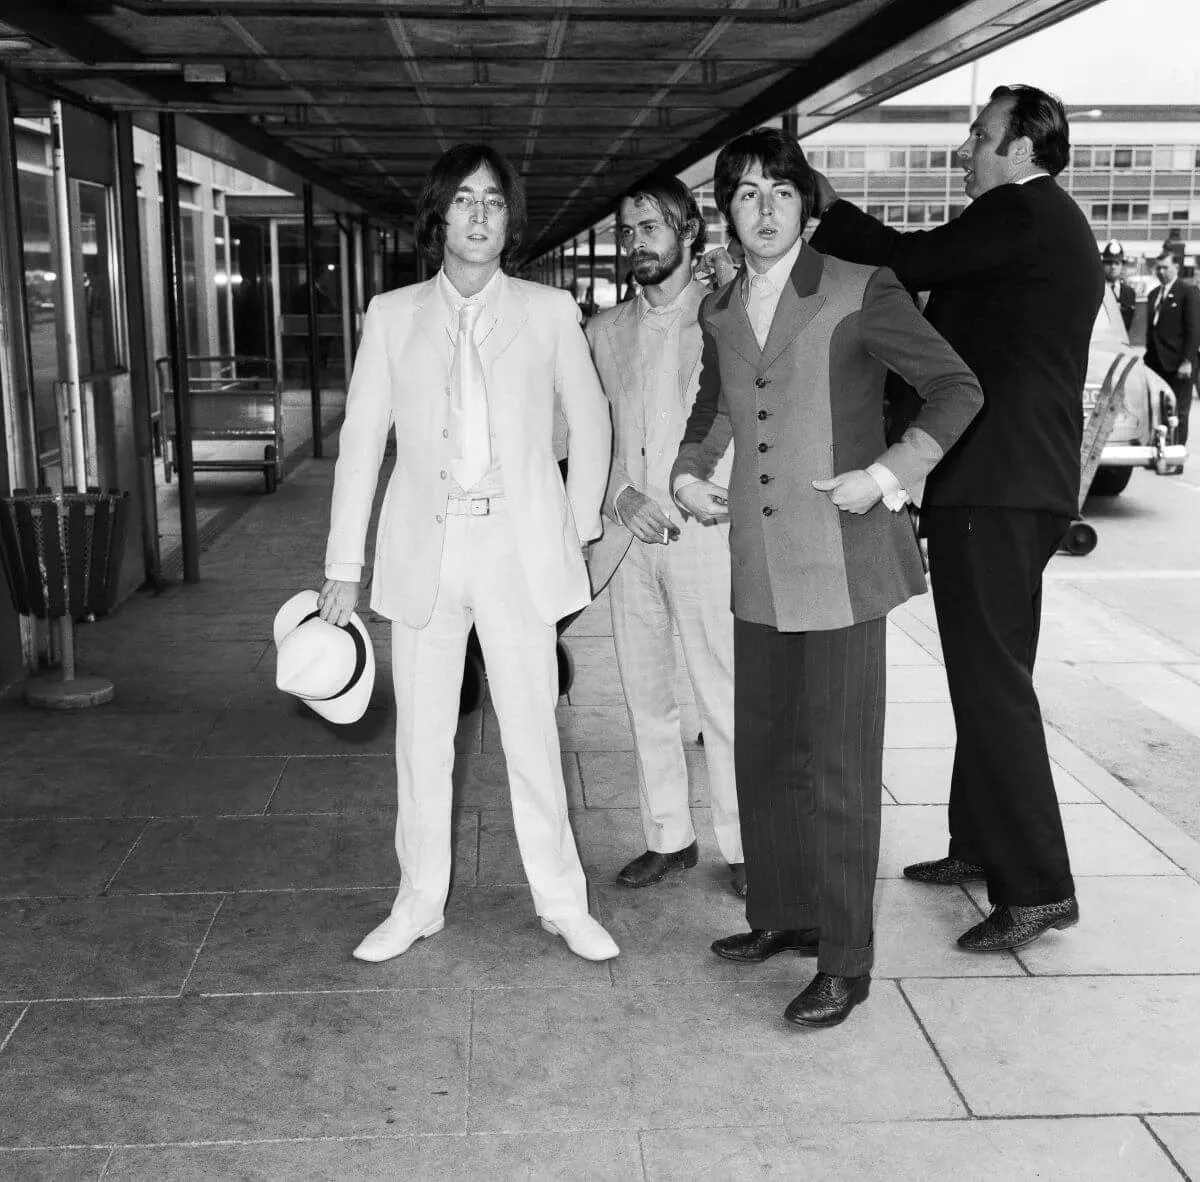 A black and white picture of John Lennon, Alex Mardas, Paul McCartney, and Les Anthony standing outside an airport.